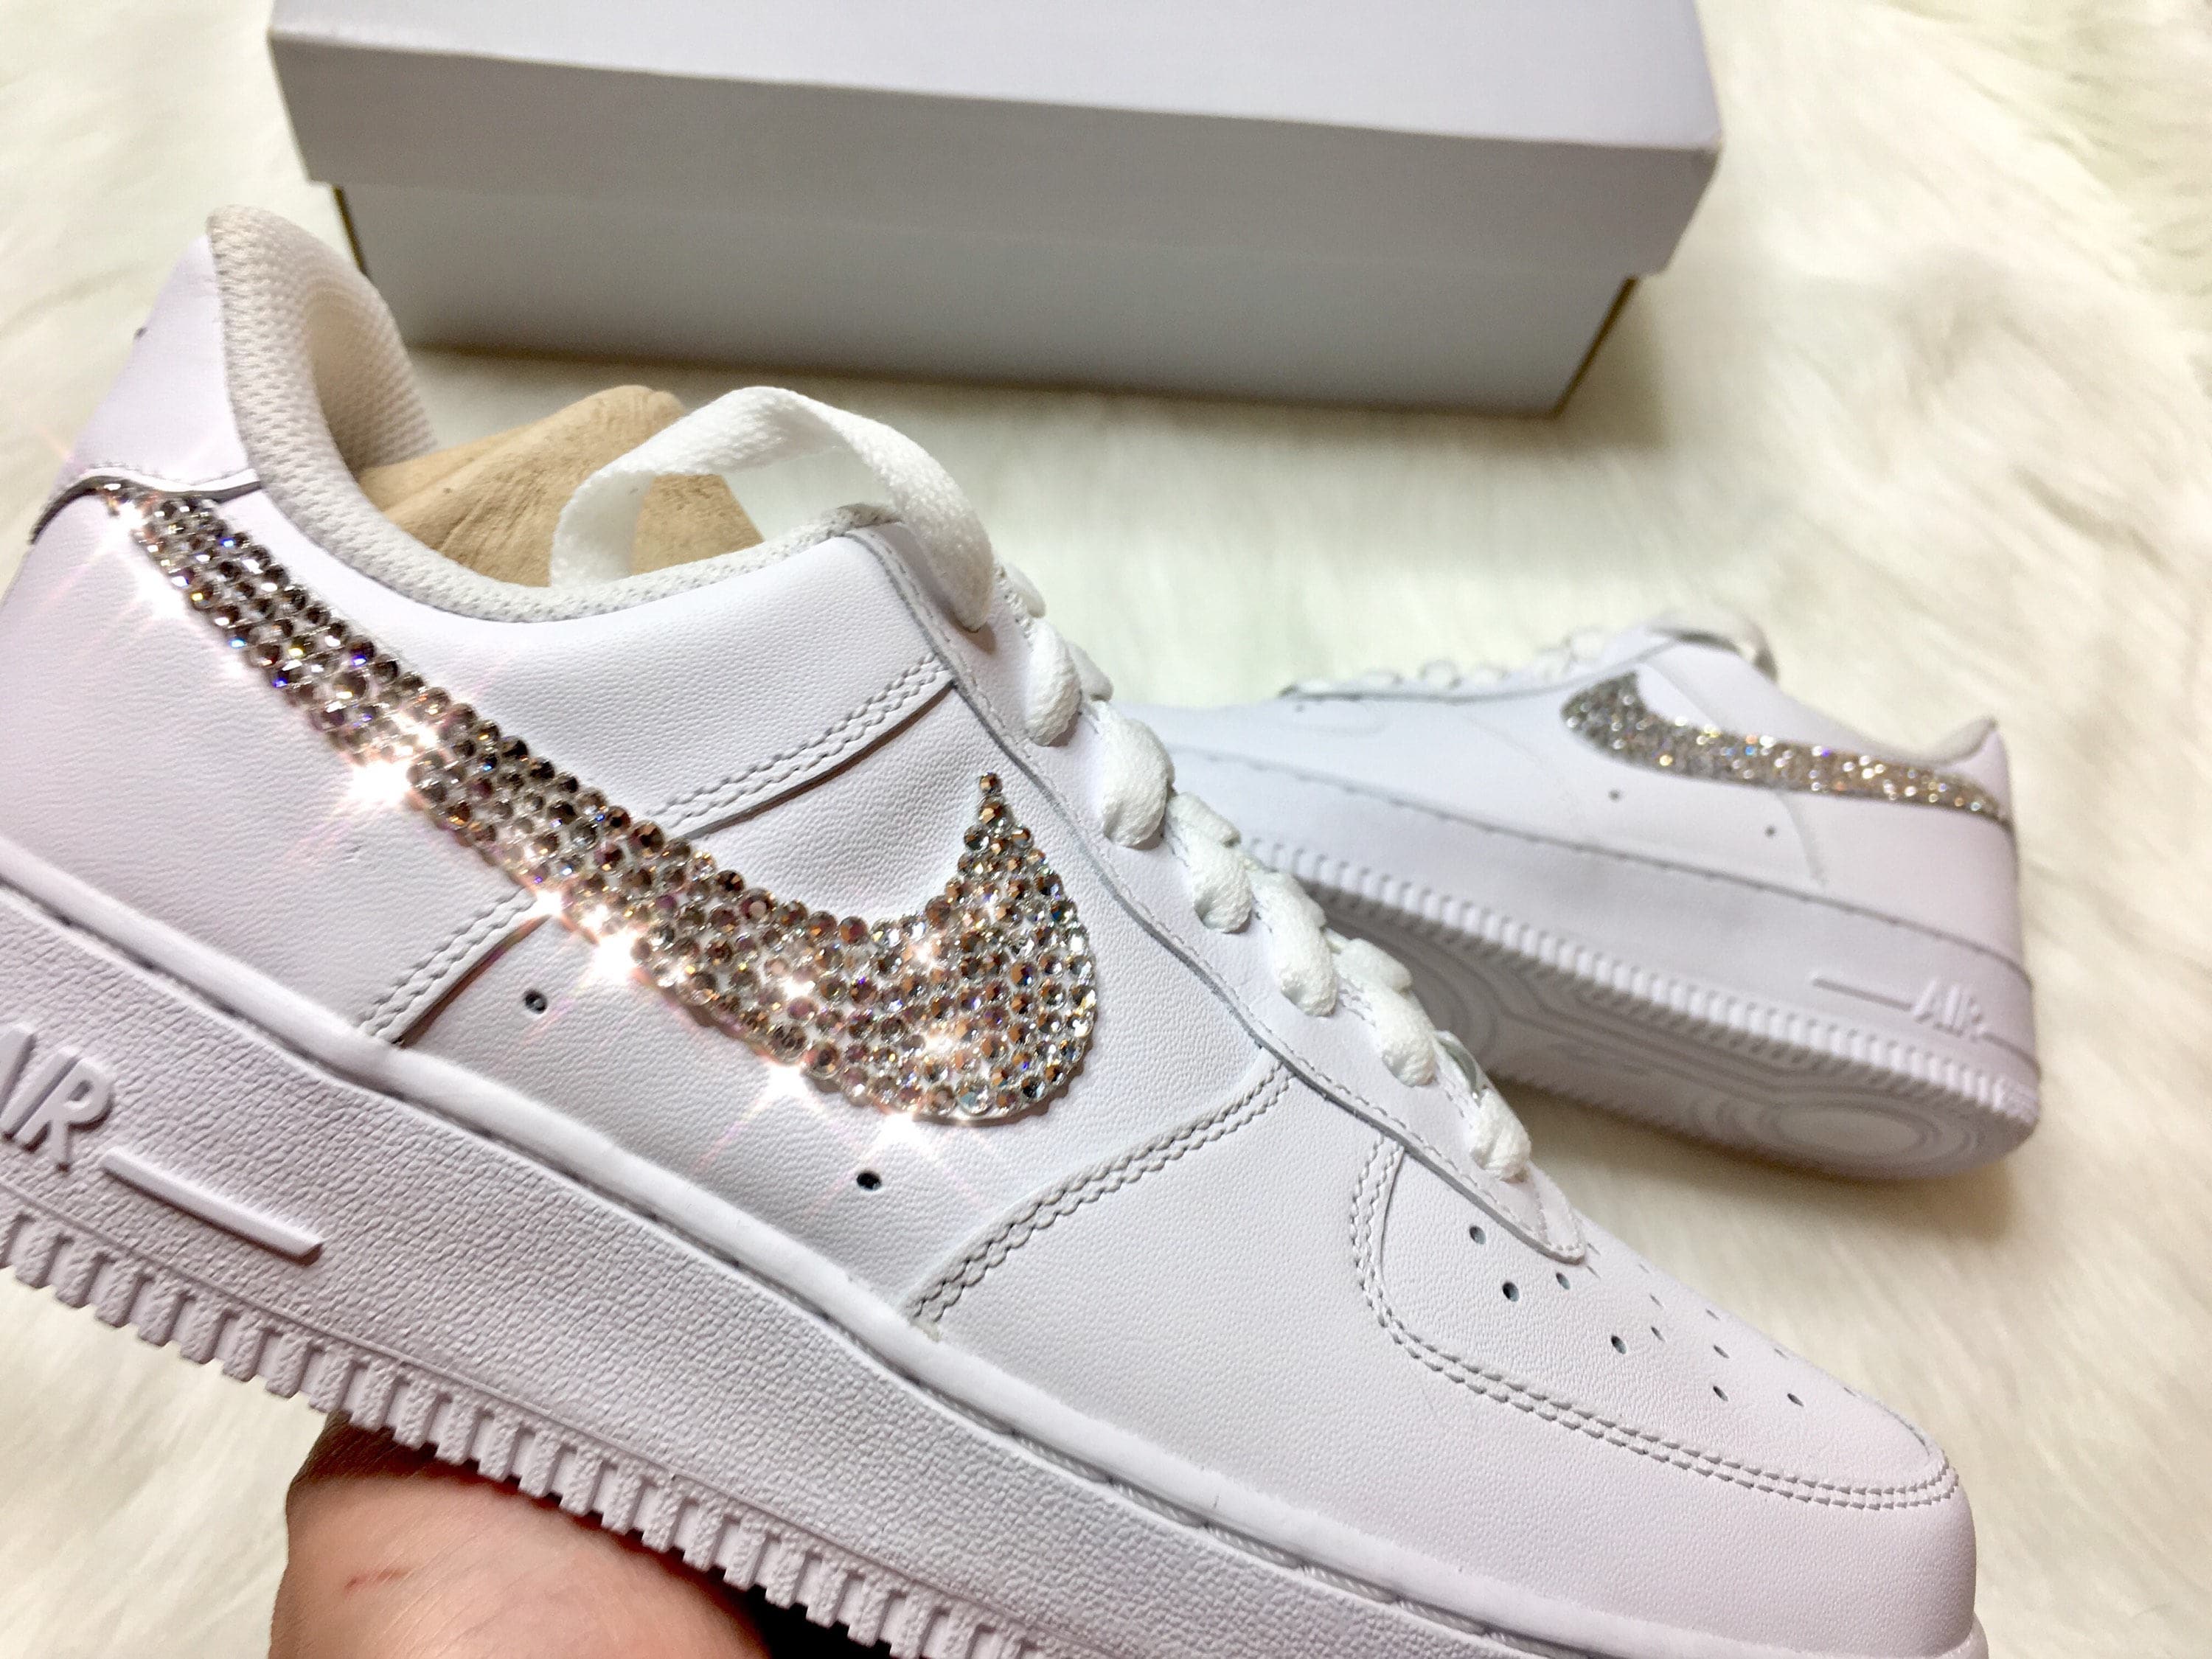 Nike Air Force 1 Low Reflective Swoosh for Sale, Authenticity Guaranteed